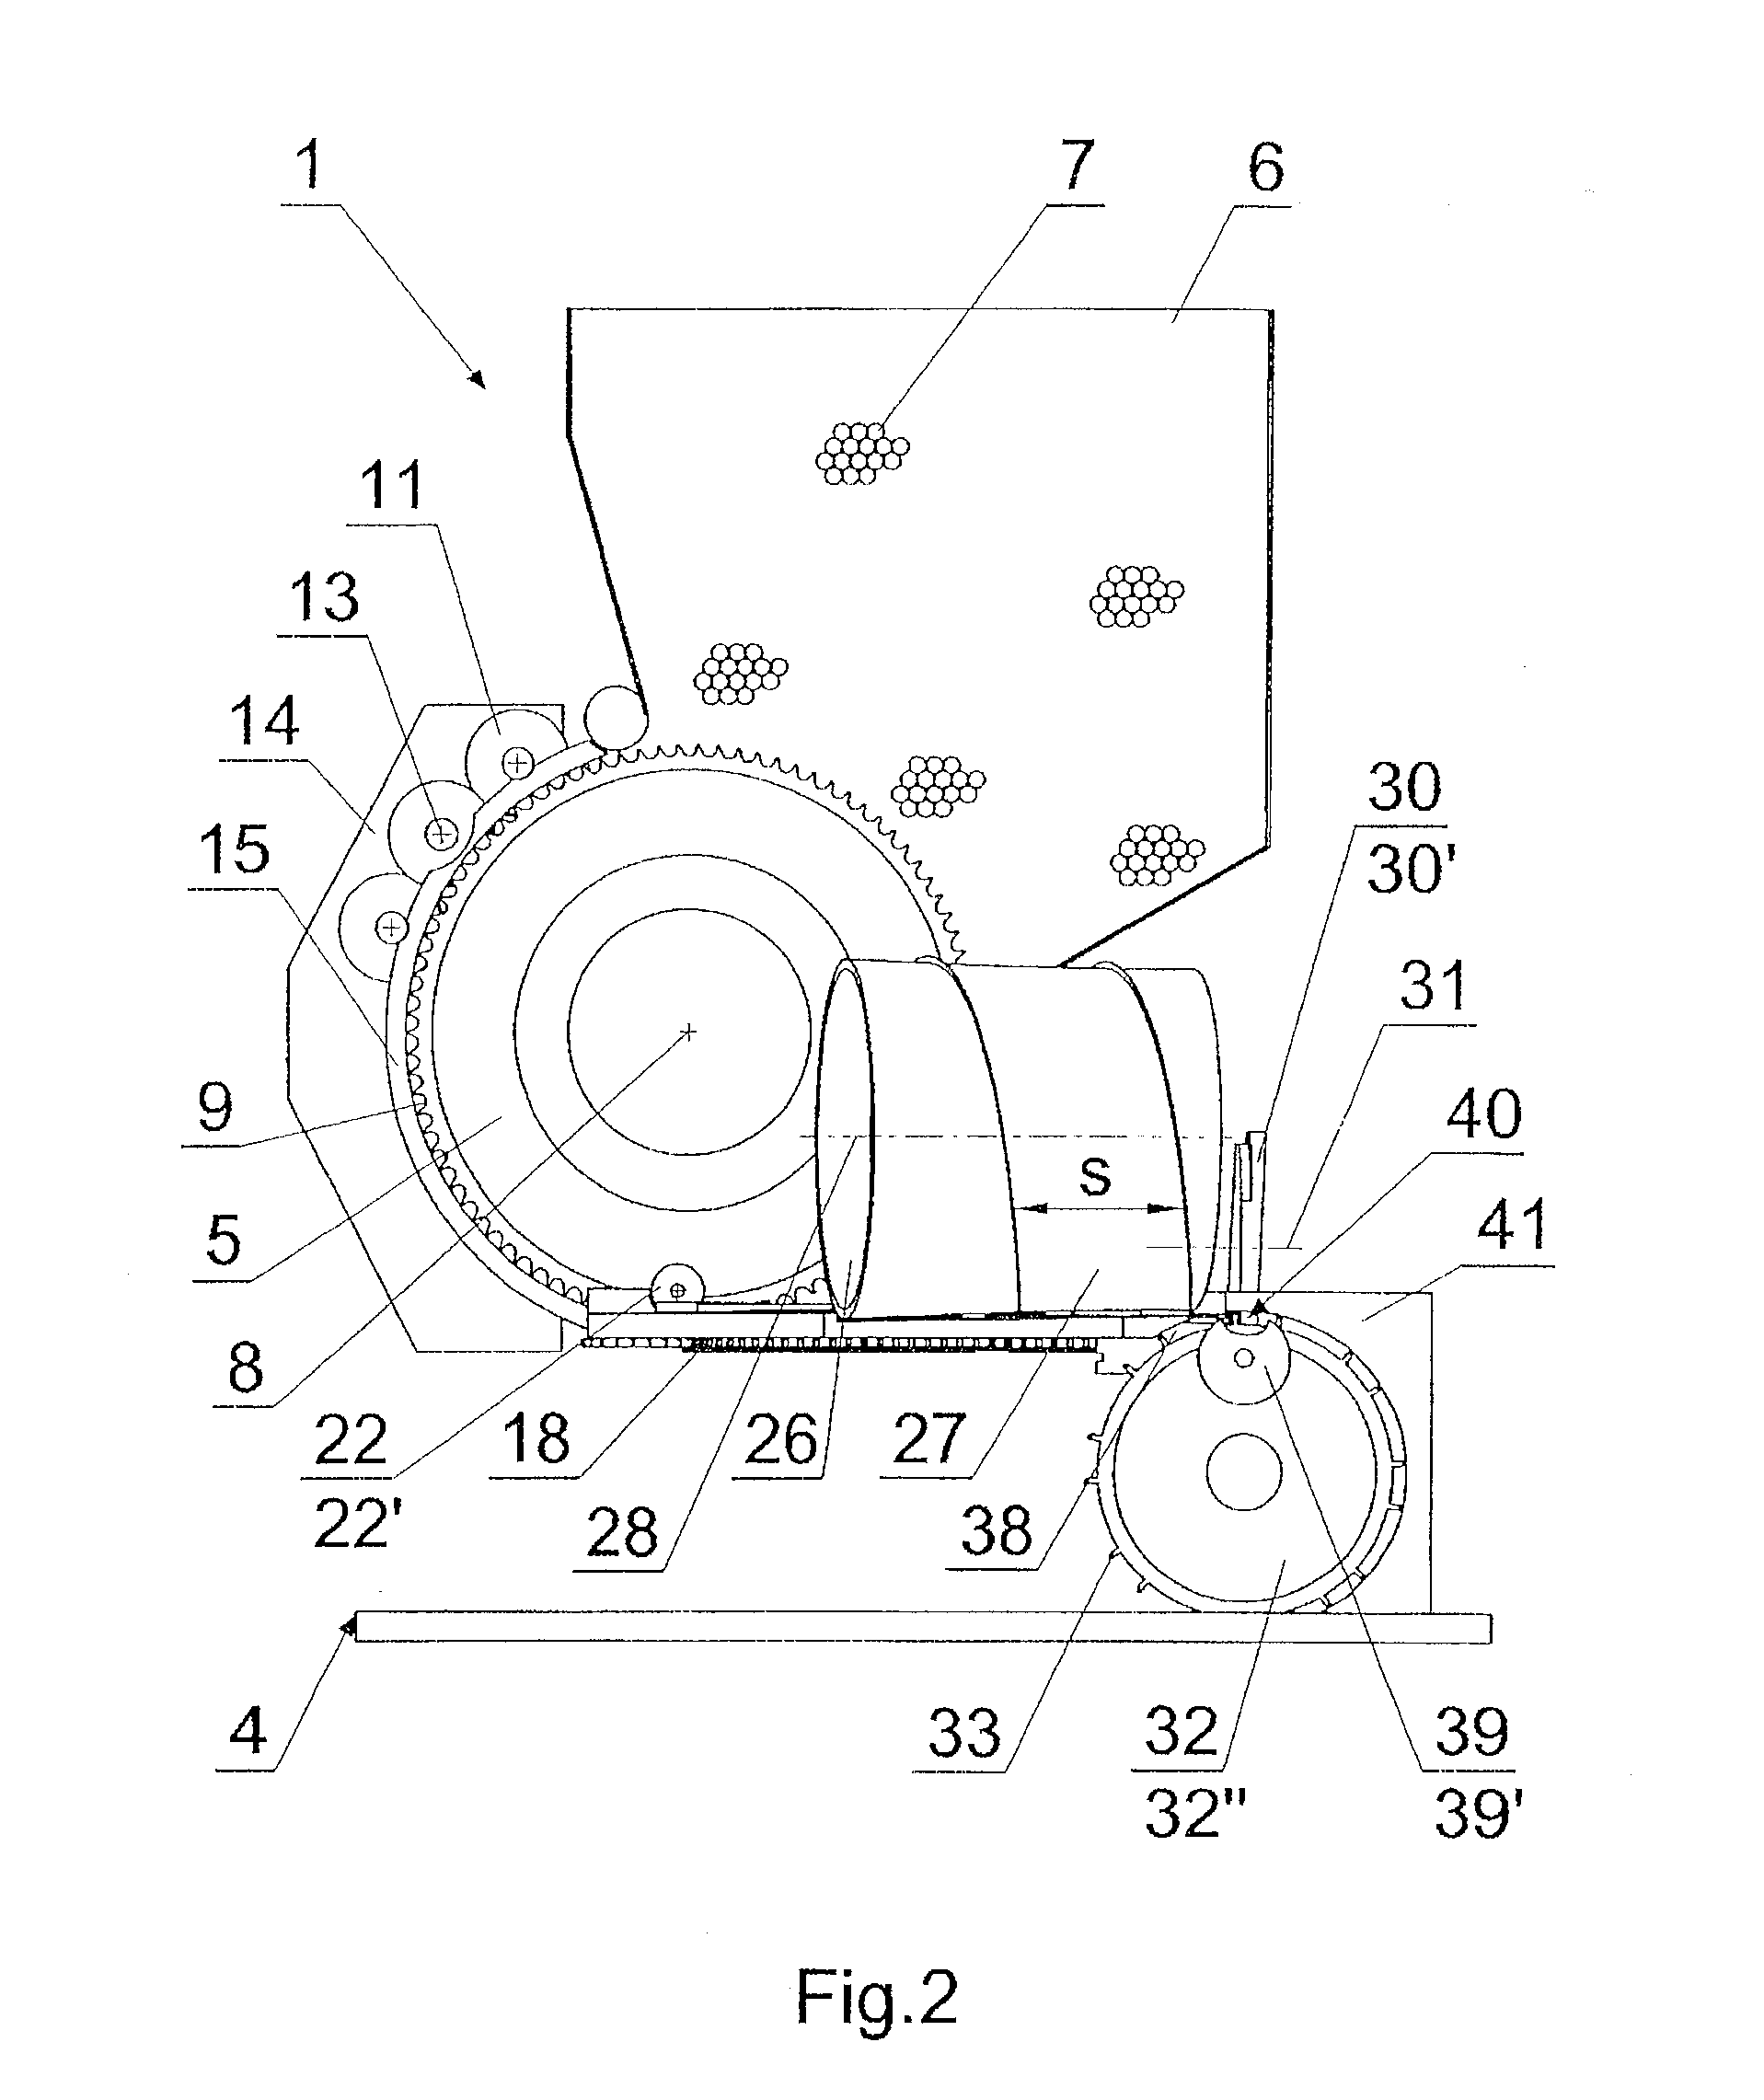 Method and apparatus for compiling groups of filter segments when producing multi-segment filter asemblies